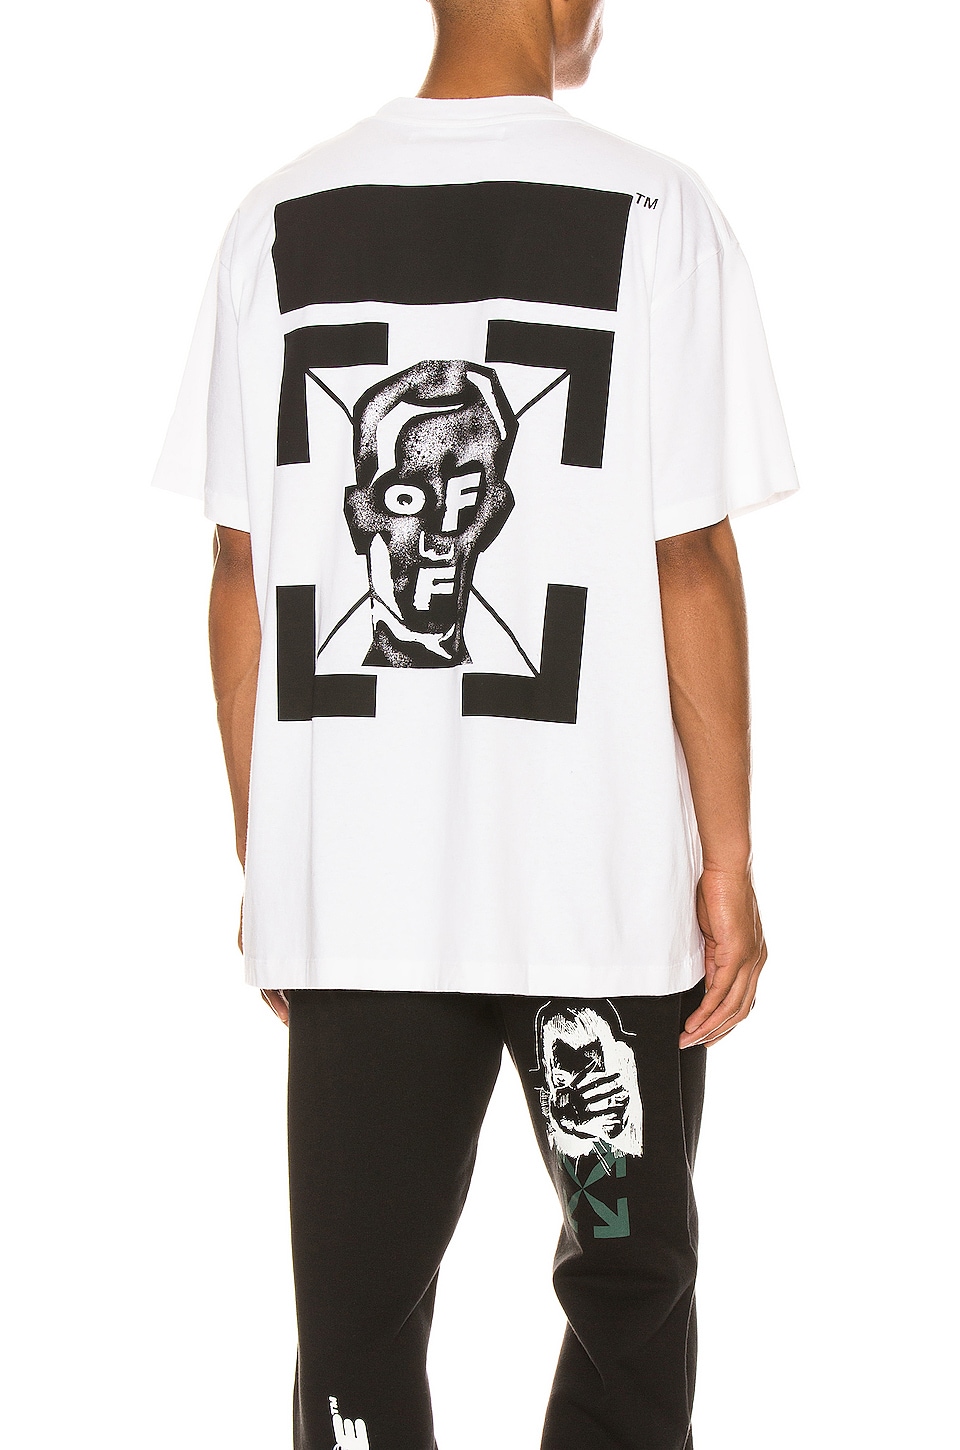 OFF-WHITE Masked Face Over Tee in White & Black | REVOLVE